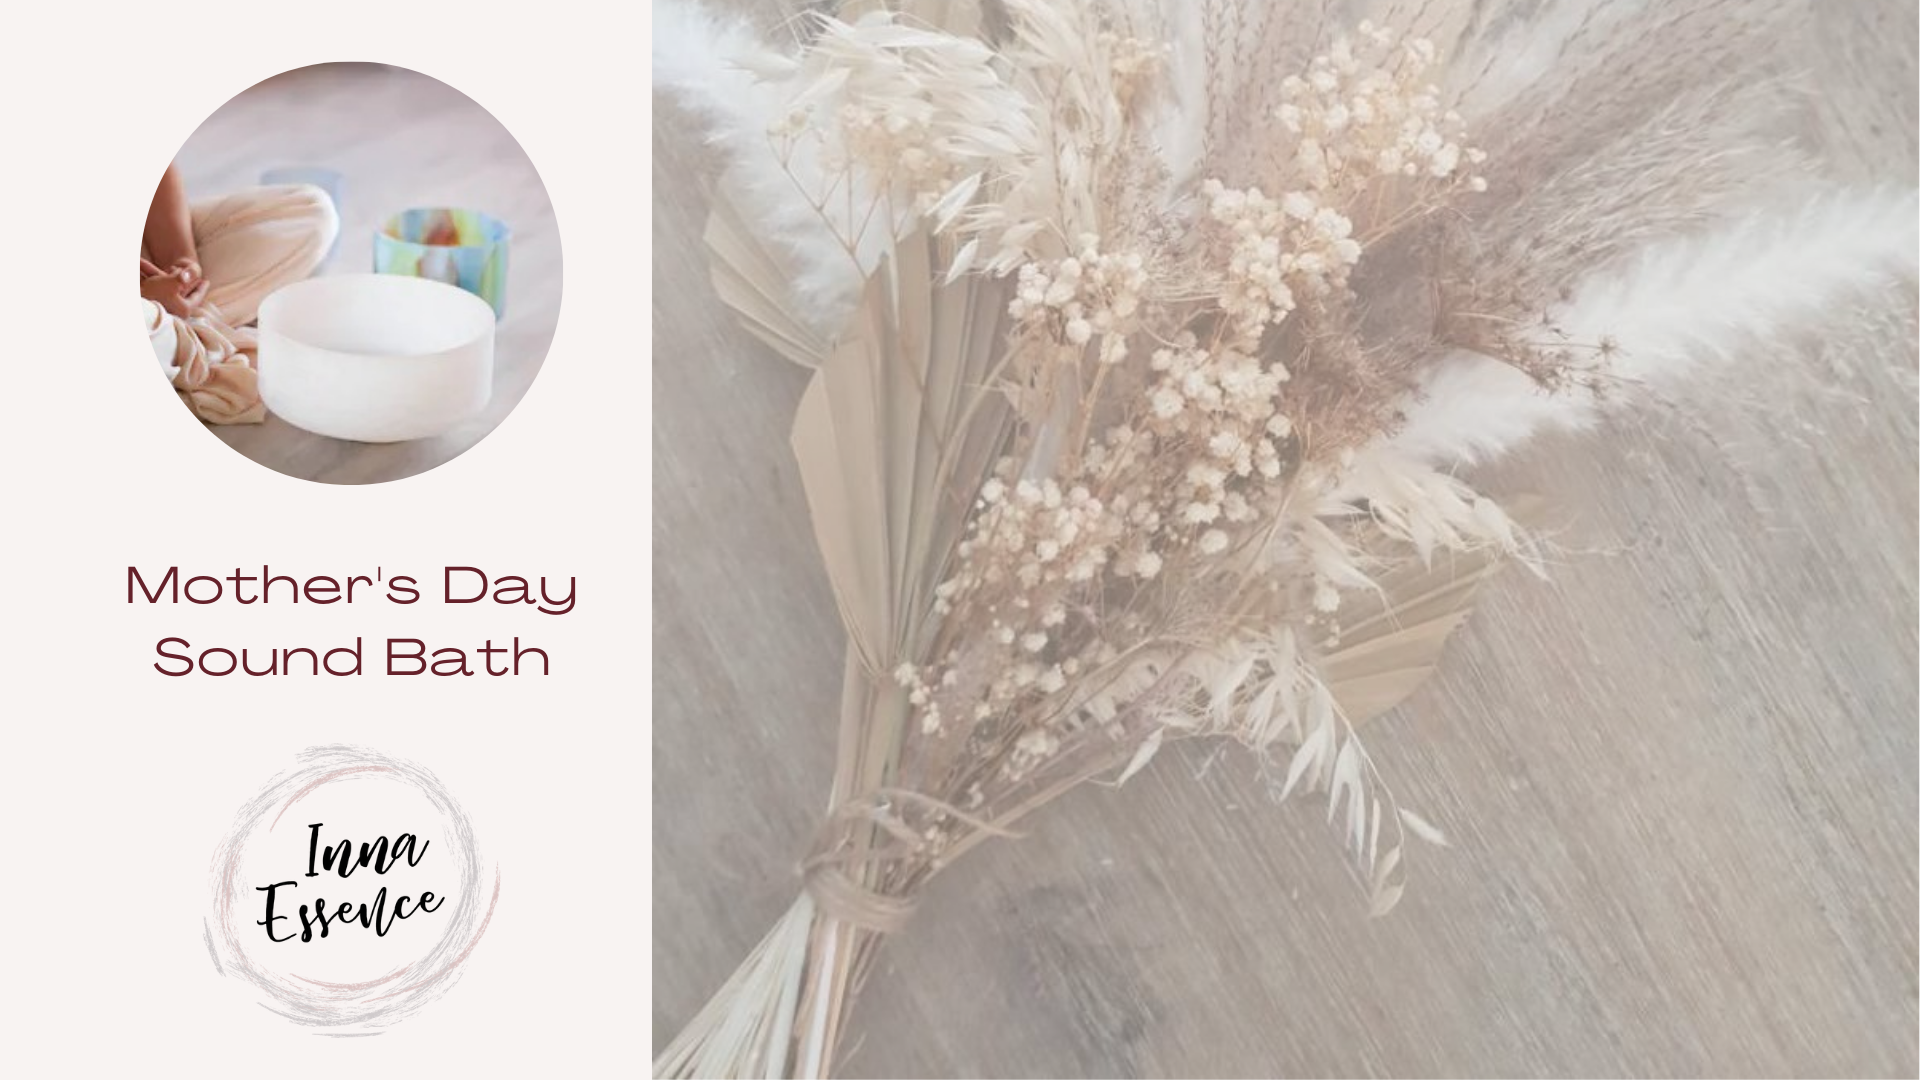 FB Event – Mothers Day Sound Bath